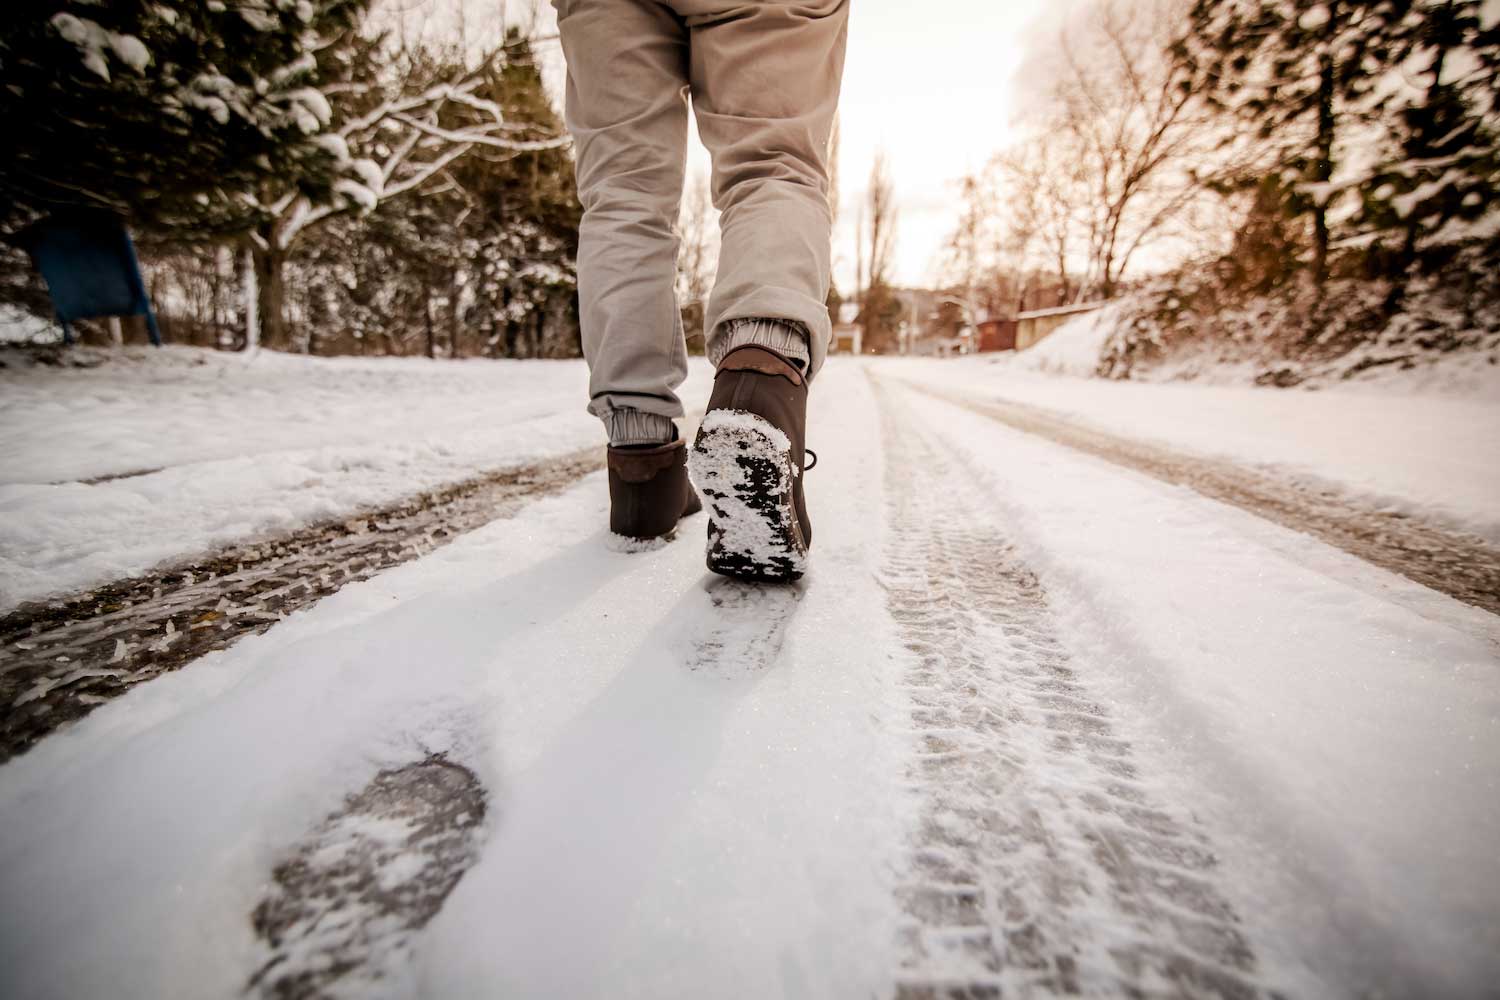 A person wearing boots walking on a snowy trail.